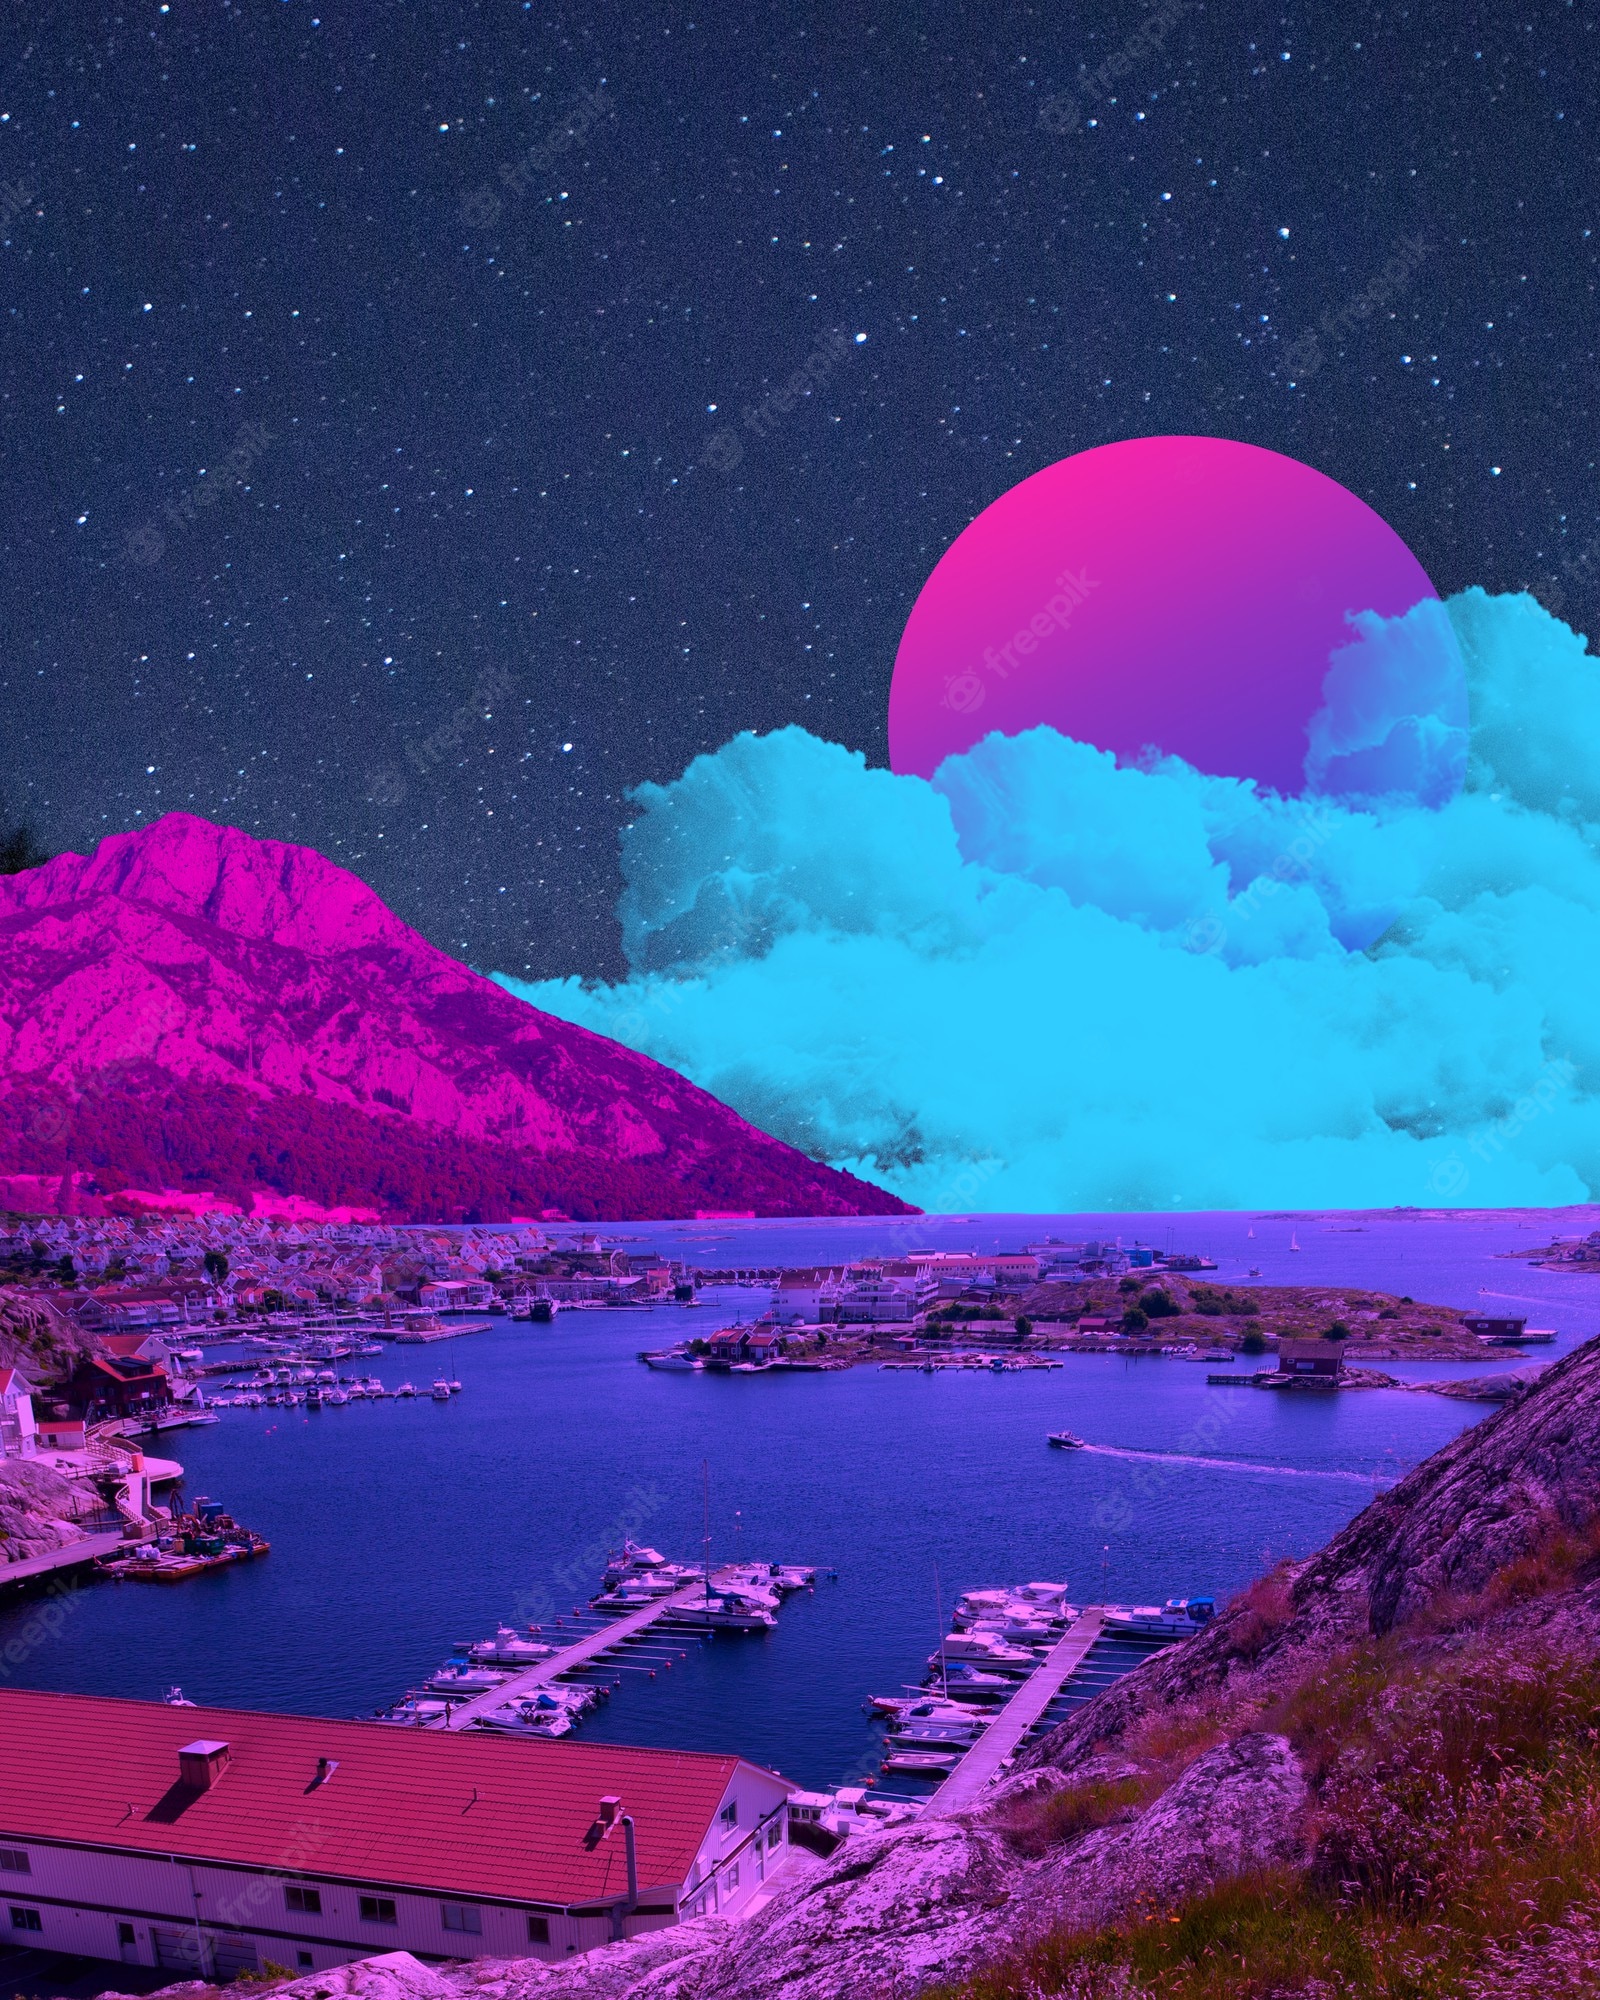 A pink and purple sky over the water - Vaporwave